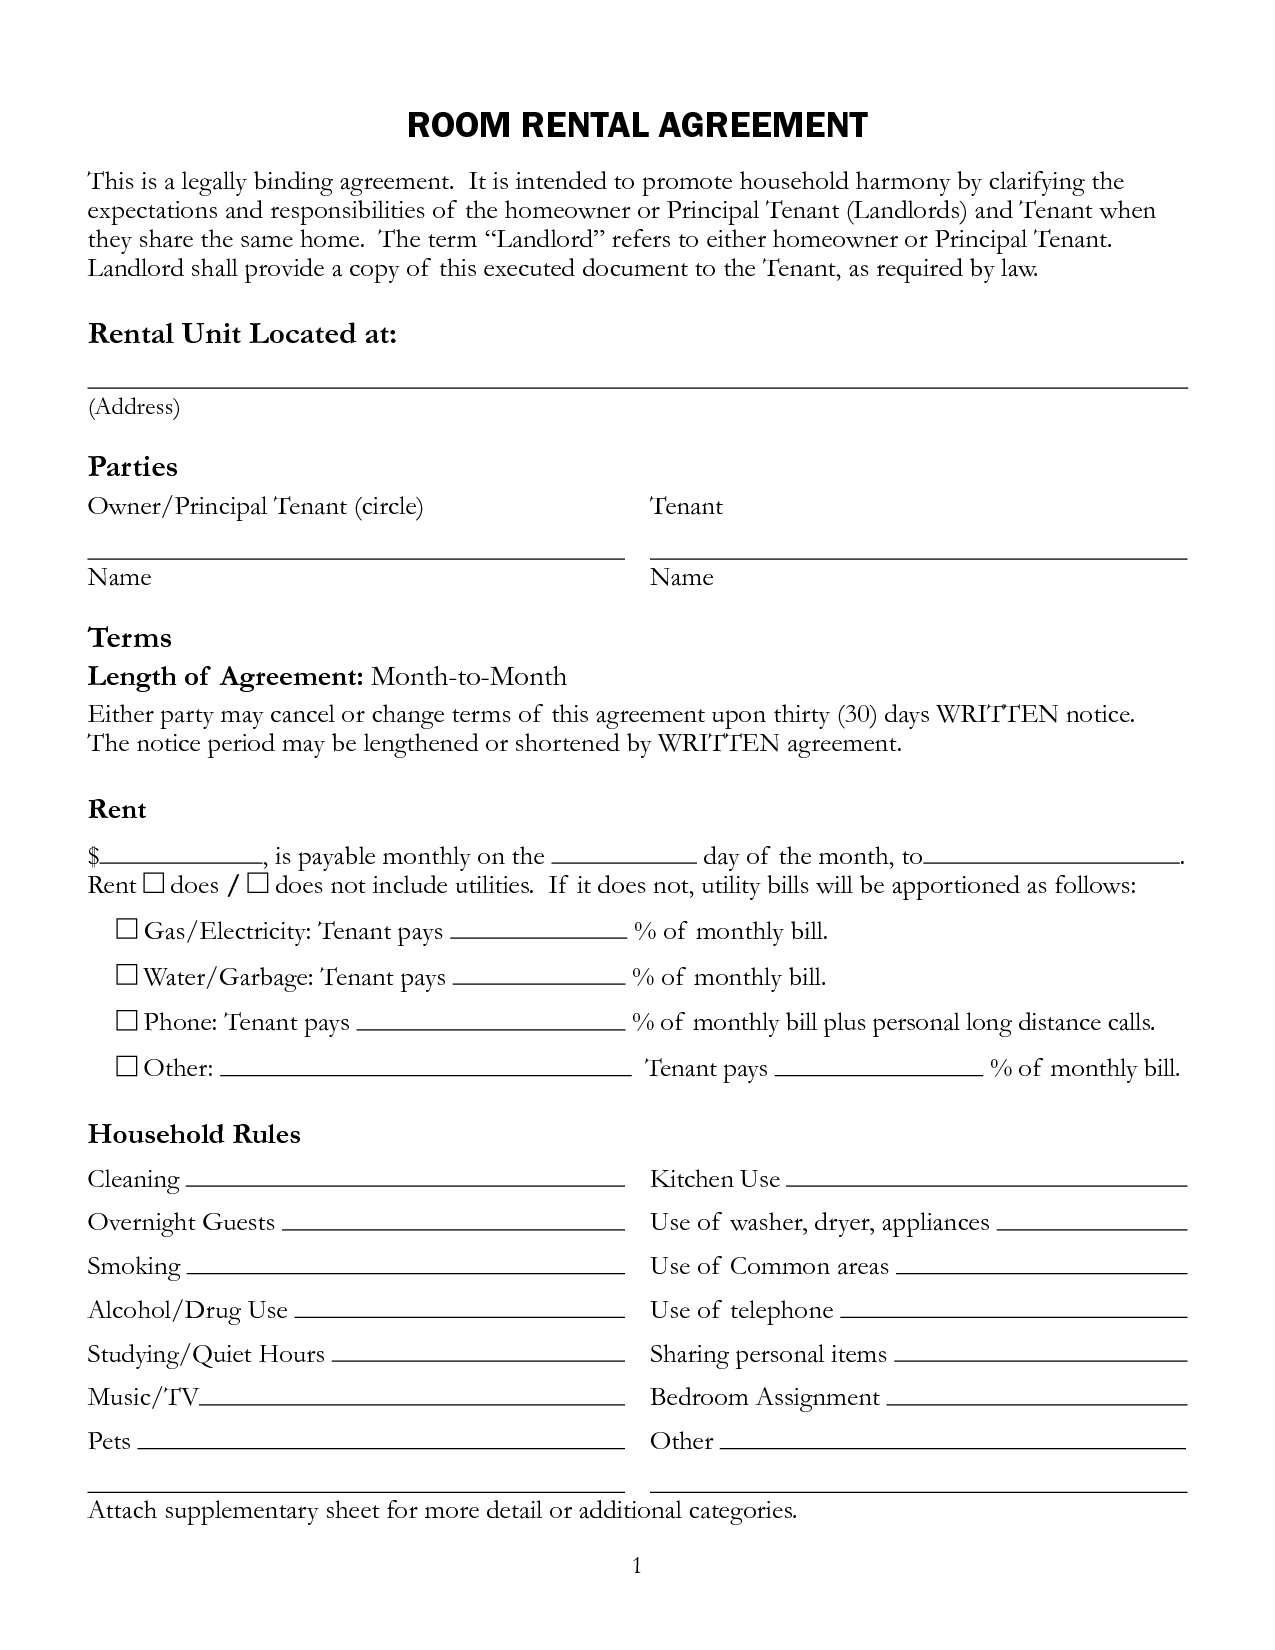 Free Printable Rental Lease Agreement Form Template | Bagnas - Free Printable Room Rental Agreement Forms